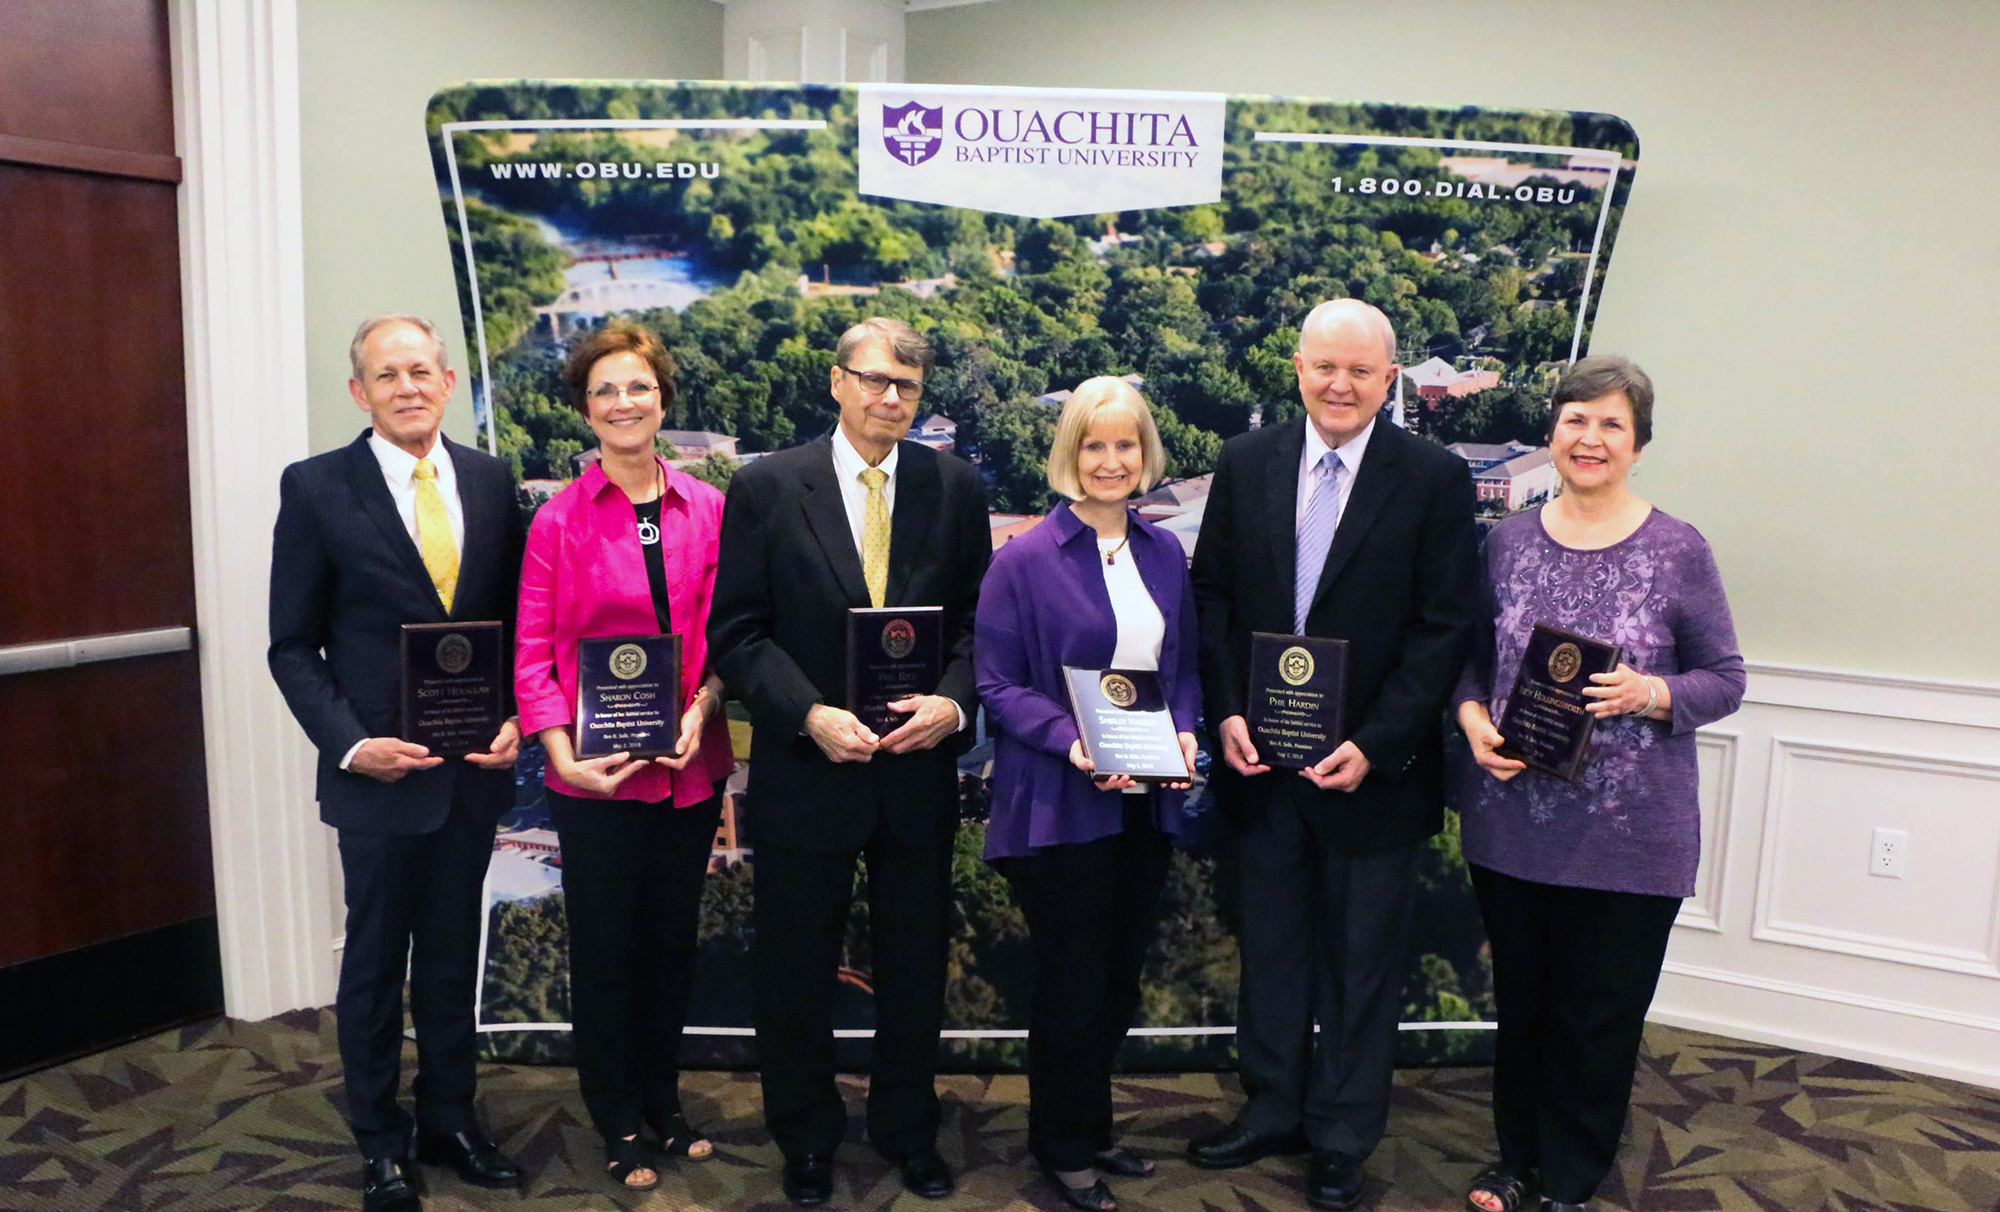 Ouachita’s 2017-2018 retirees include (from left): Dr. Scott Holsclaw, Sharon Cosh, Dr. Phil Rice, Shirley Hardin, Phil Hardin, Judy Hollingsworth and Luke Owens (not pictured).